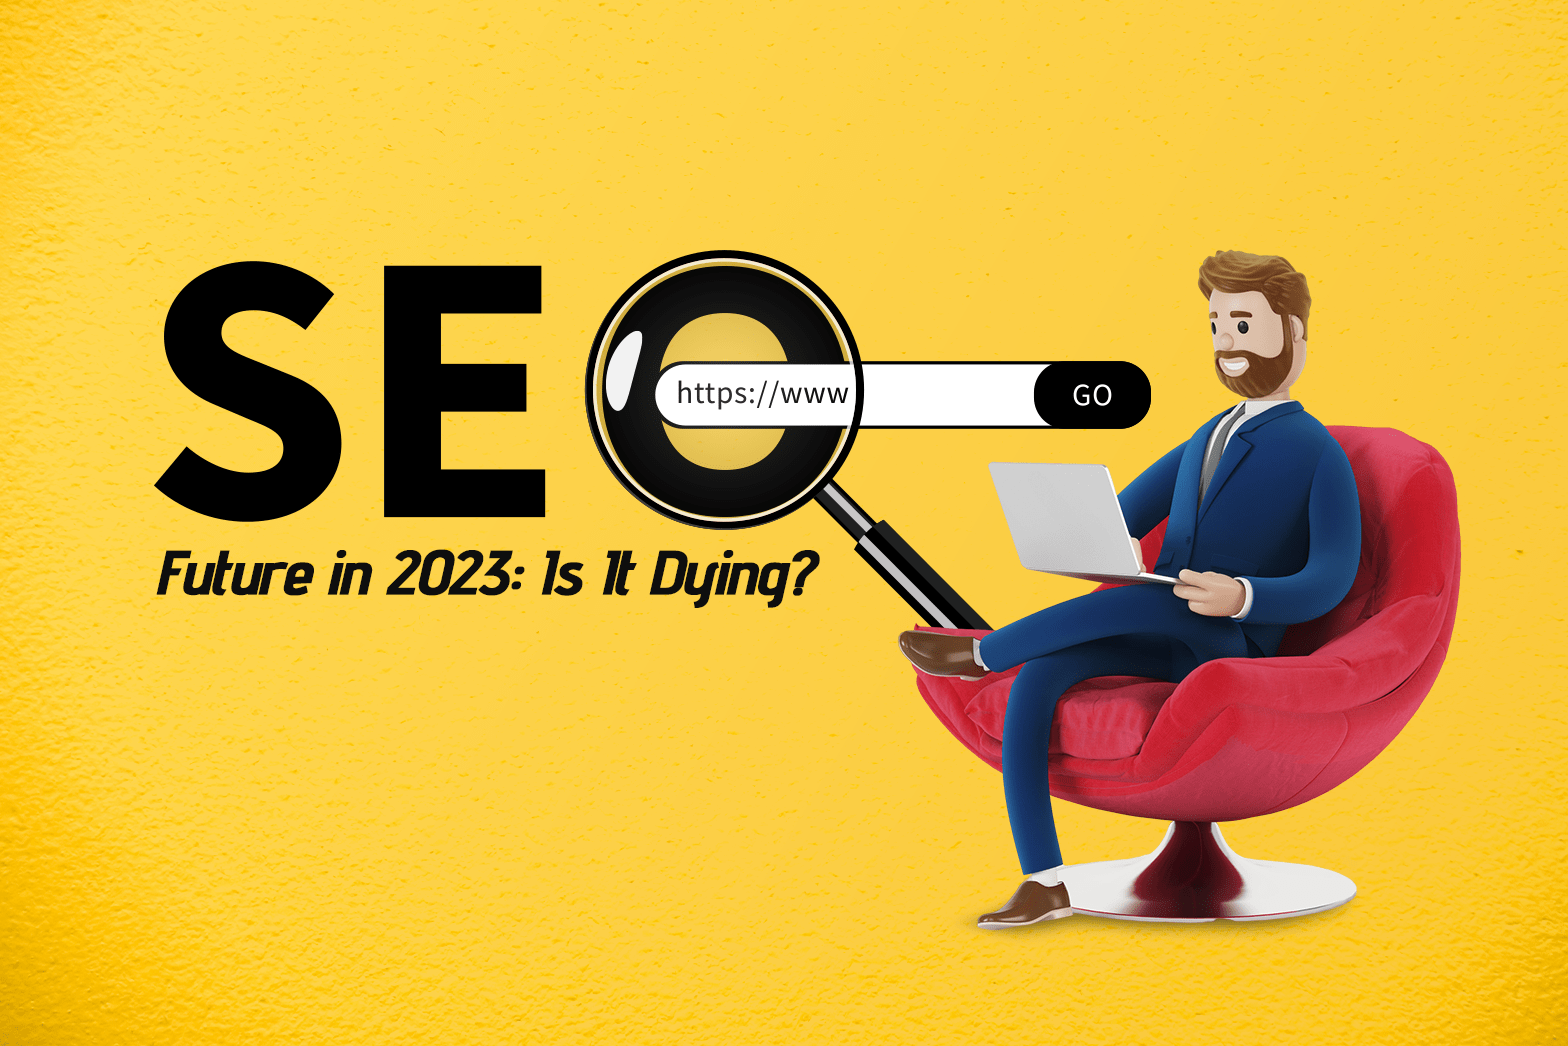 SEO’s Future in 2023: Is It Dying?